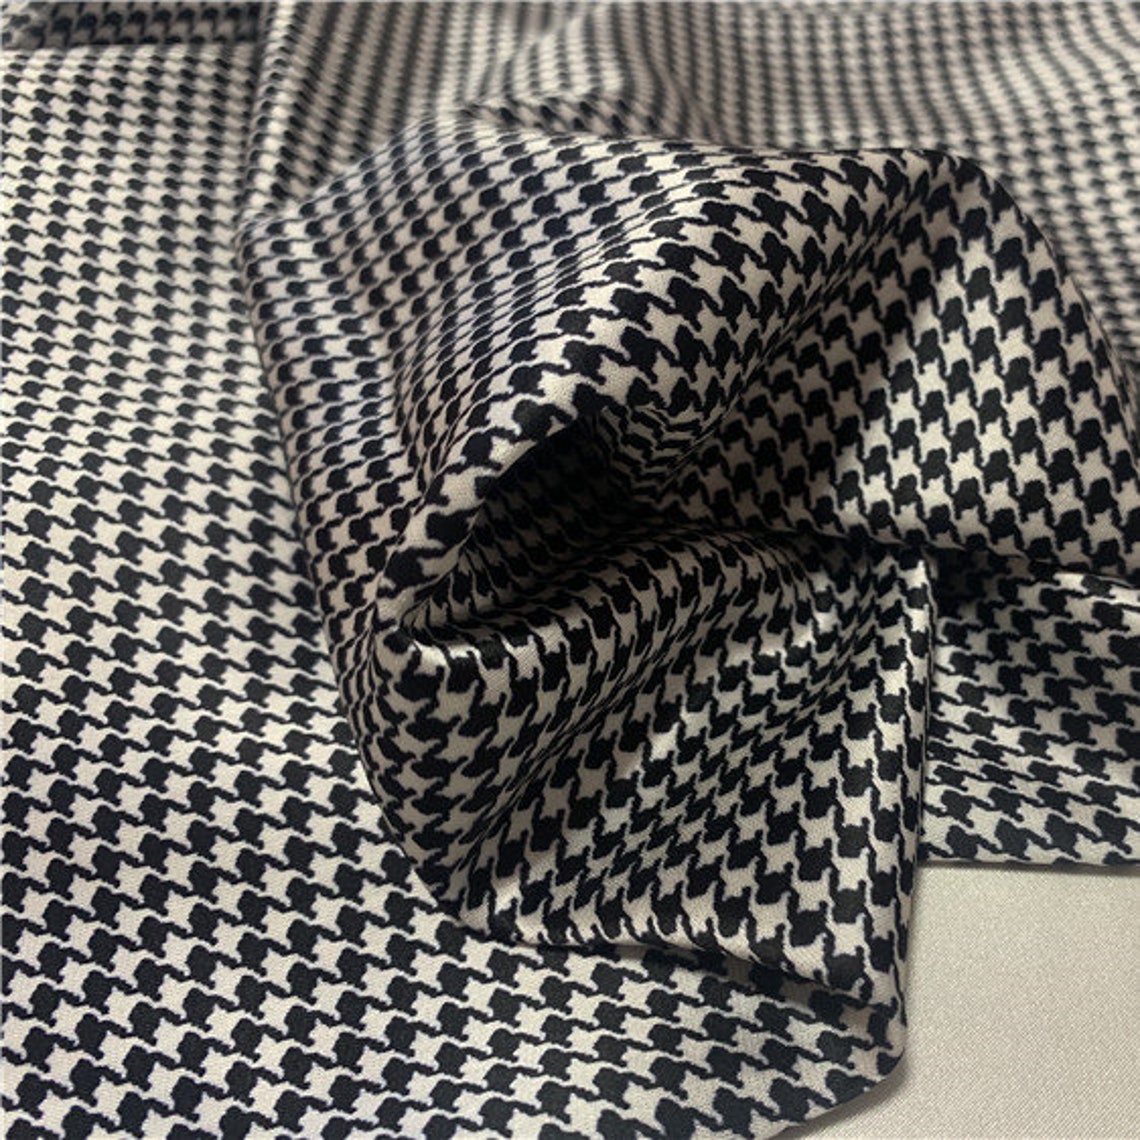 Houndstooth Print triacetate fabric by the yard | Etsy